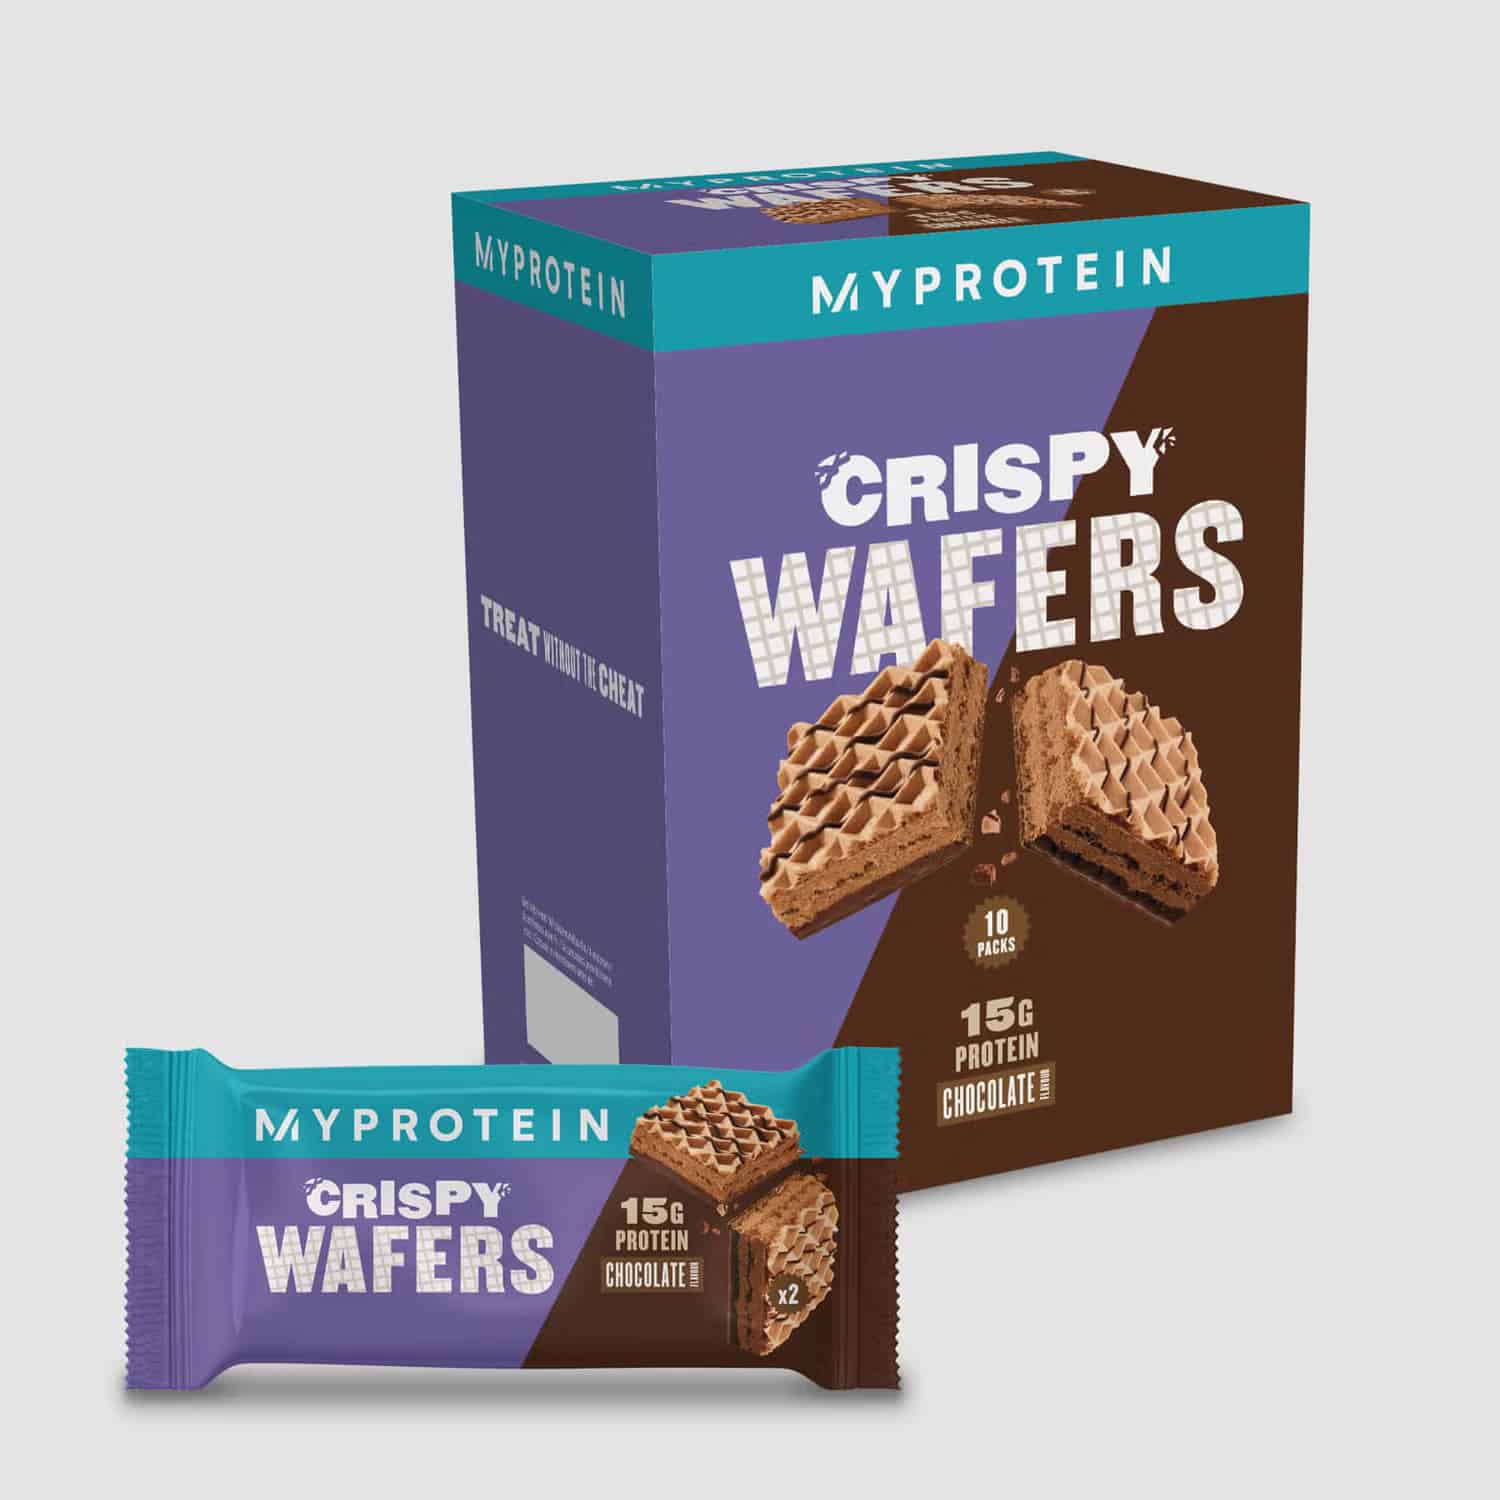 Crispy Wafers 10 Bar Pack Discounts and Cashback